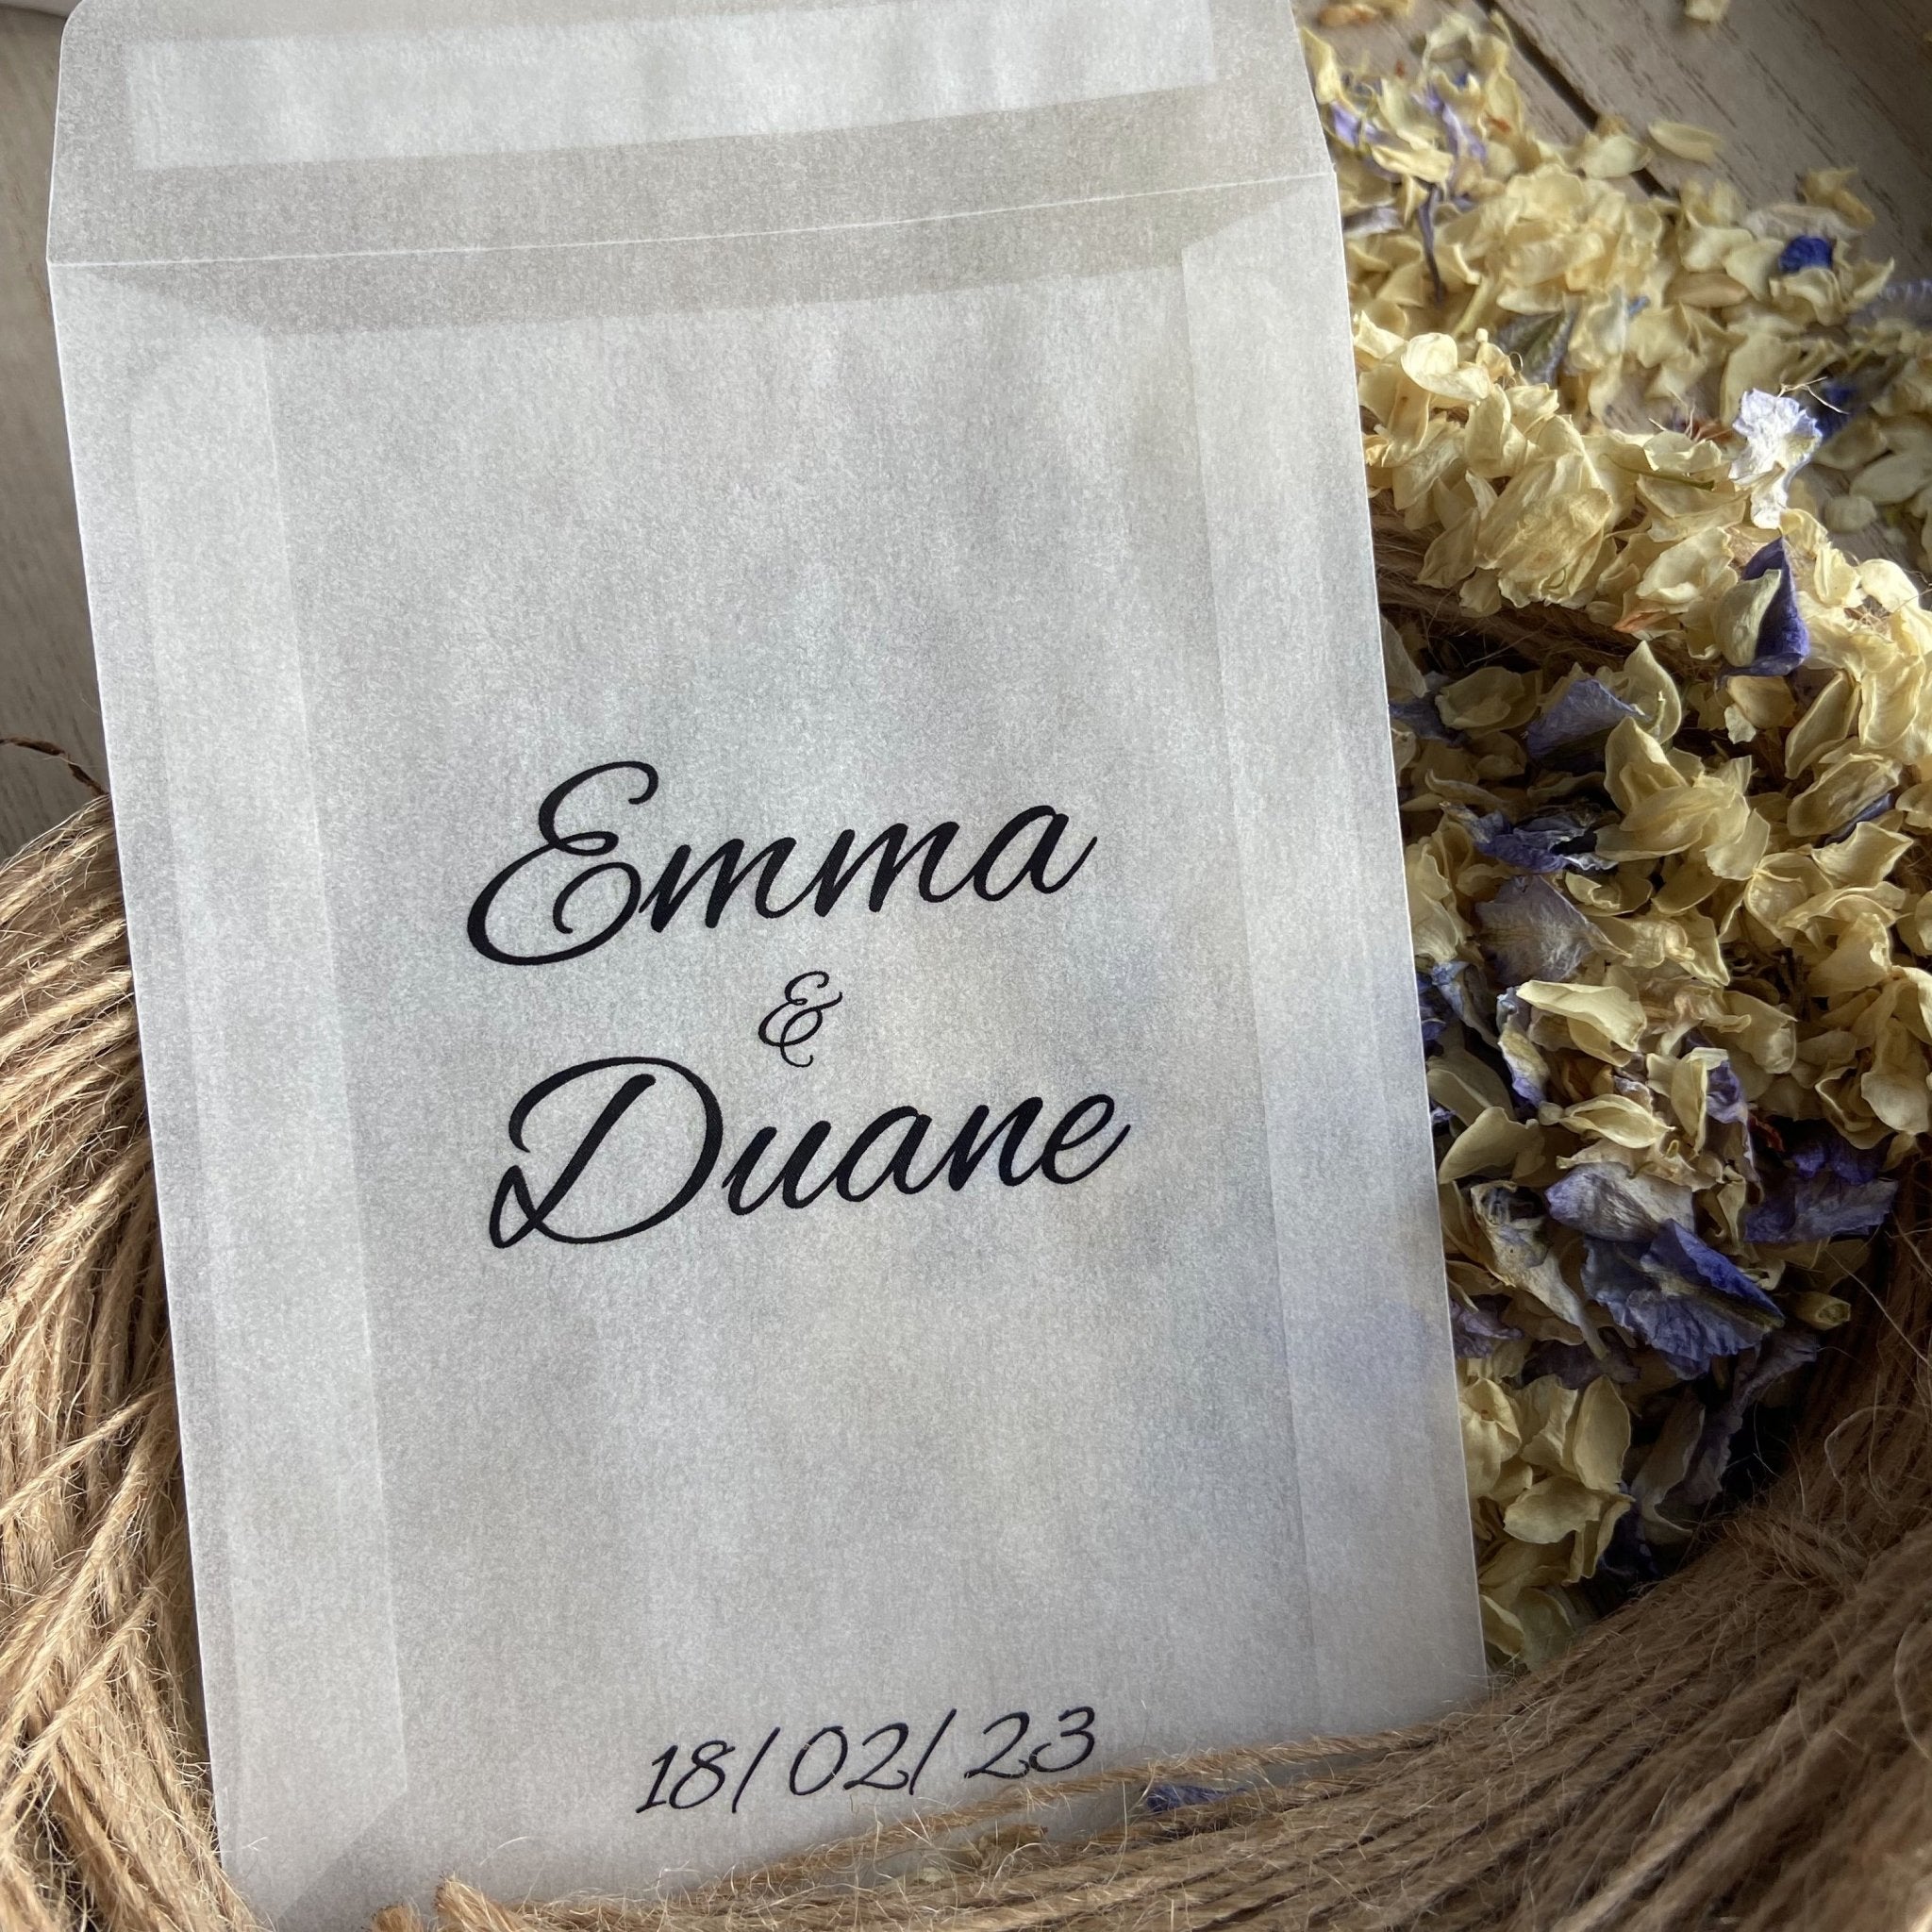 [Custom Name] Personalized Tote Bag - Bride with Hearts Design